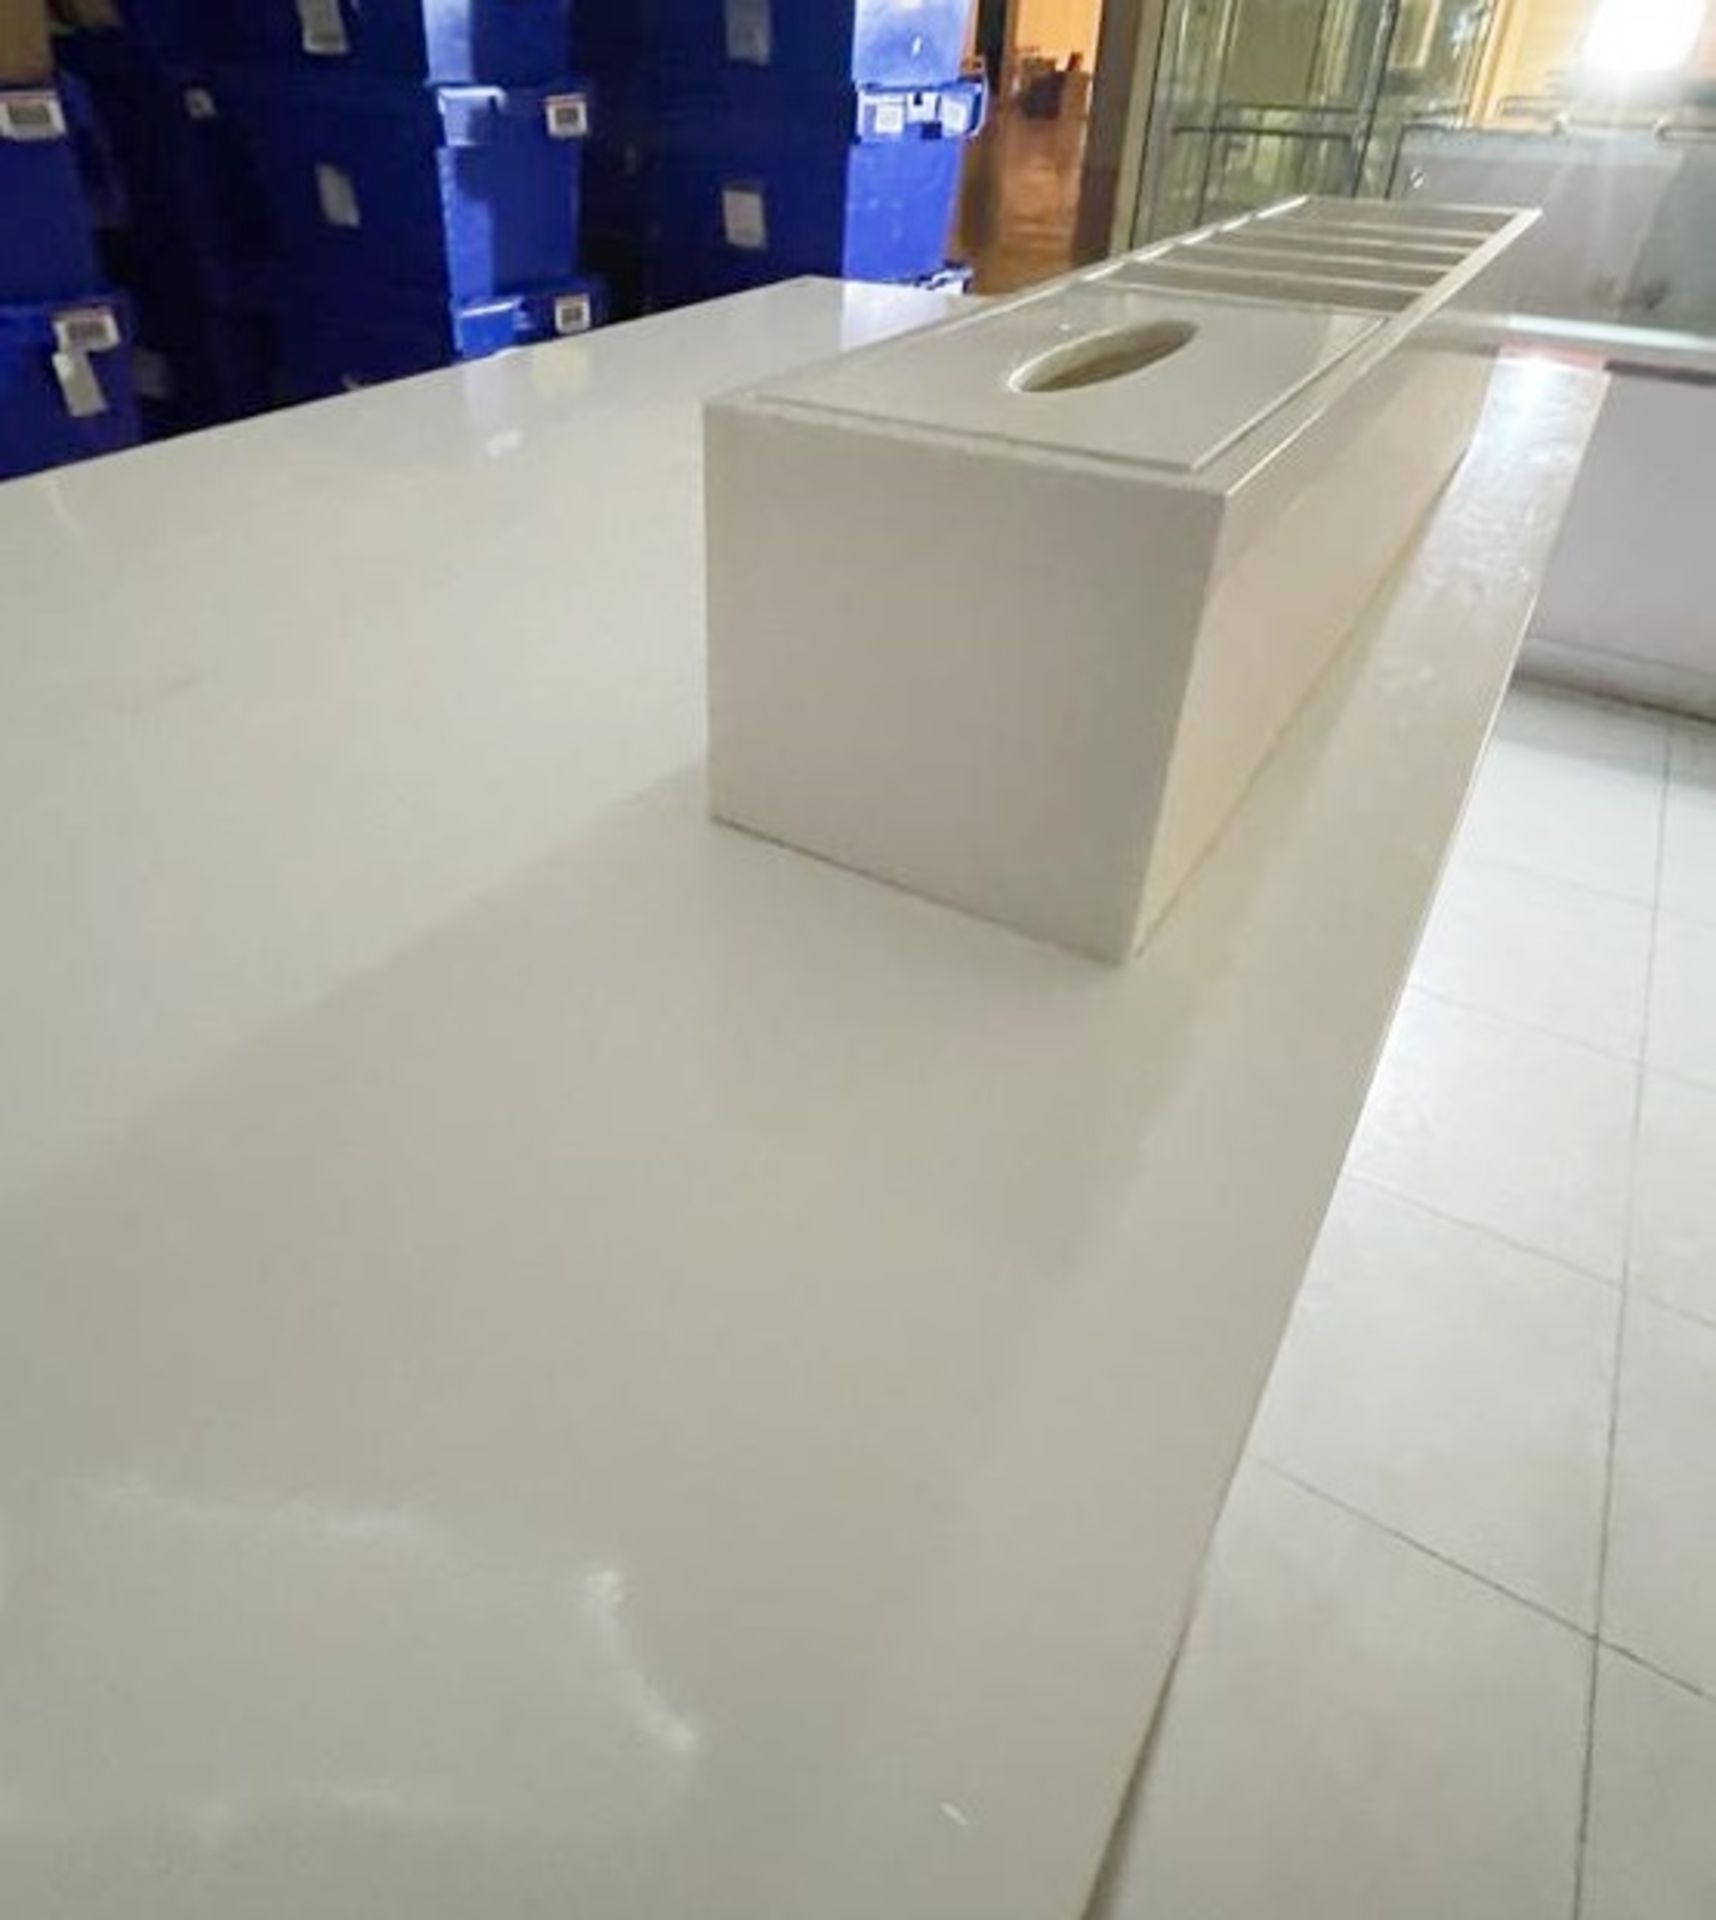 1 x Benefit Retail Testing Counter With Corian Worktop, Sample Holders and Bin Chute - Features Lots - Image 10 of 19